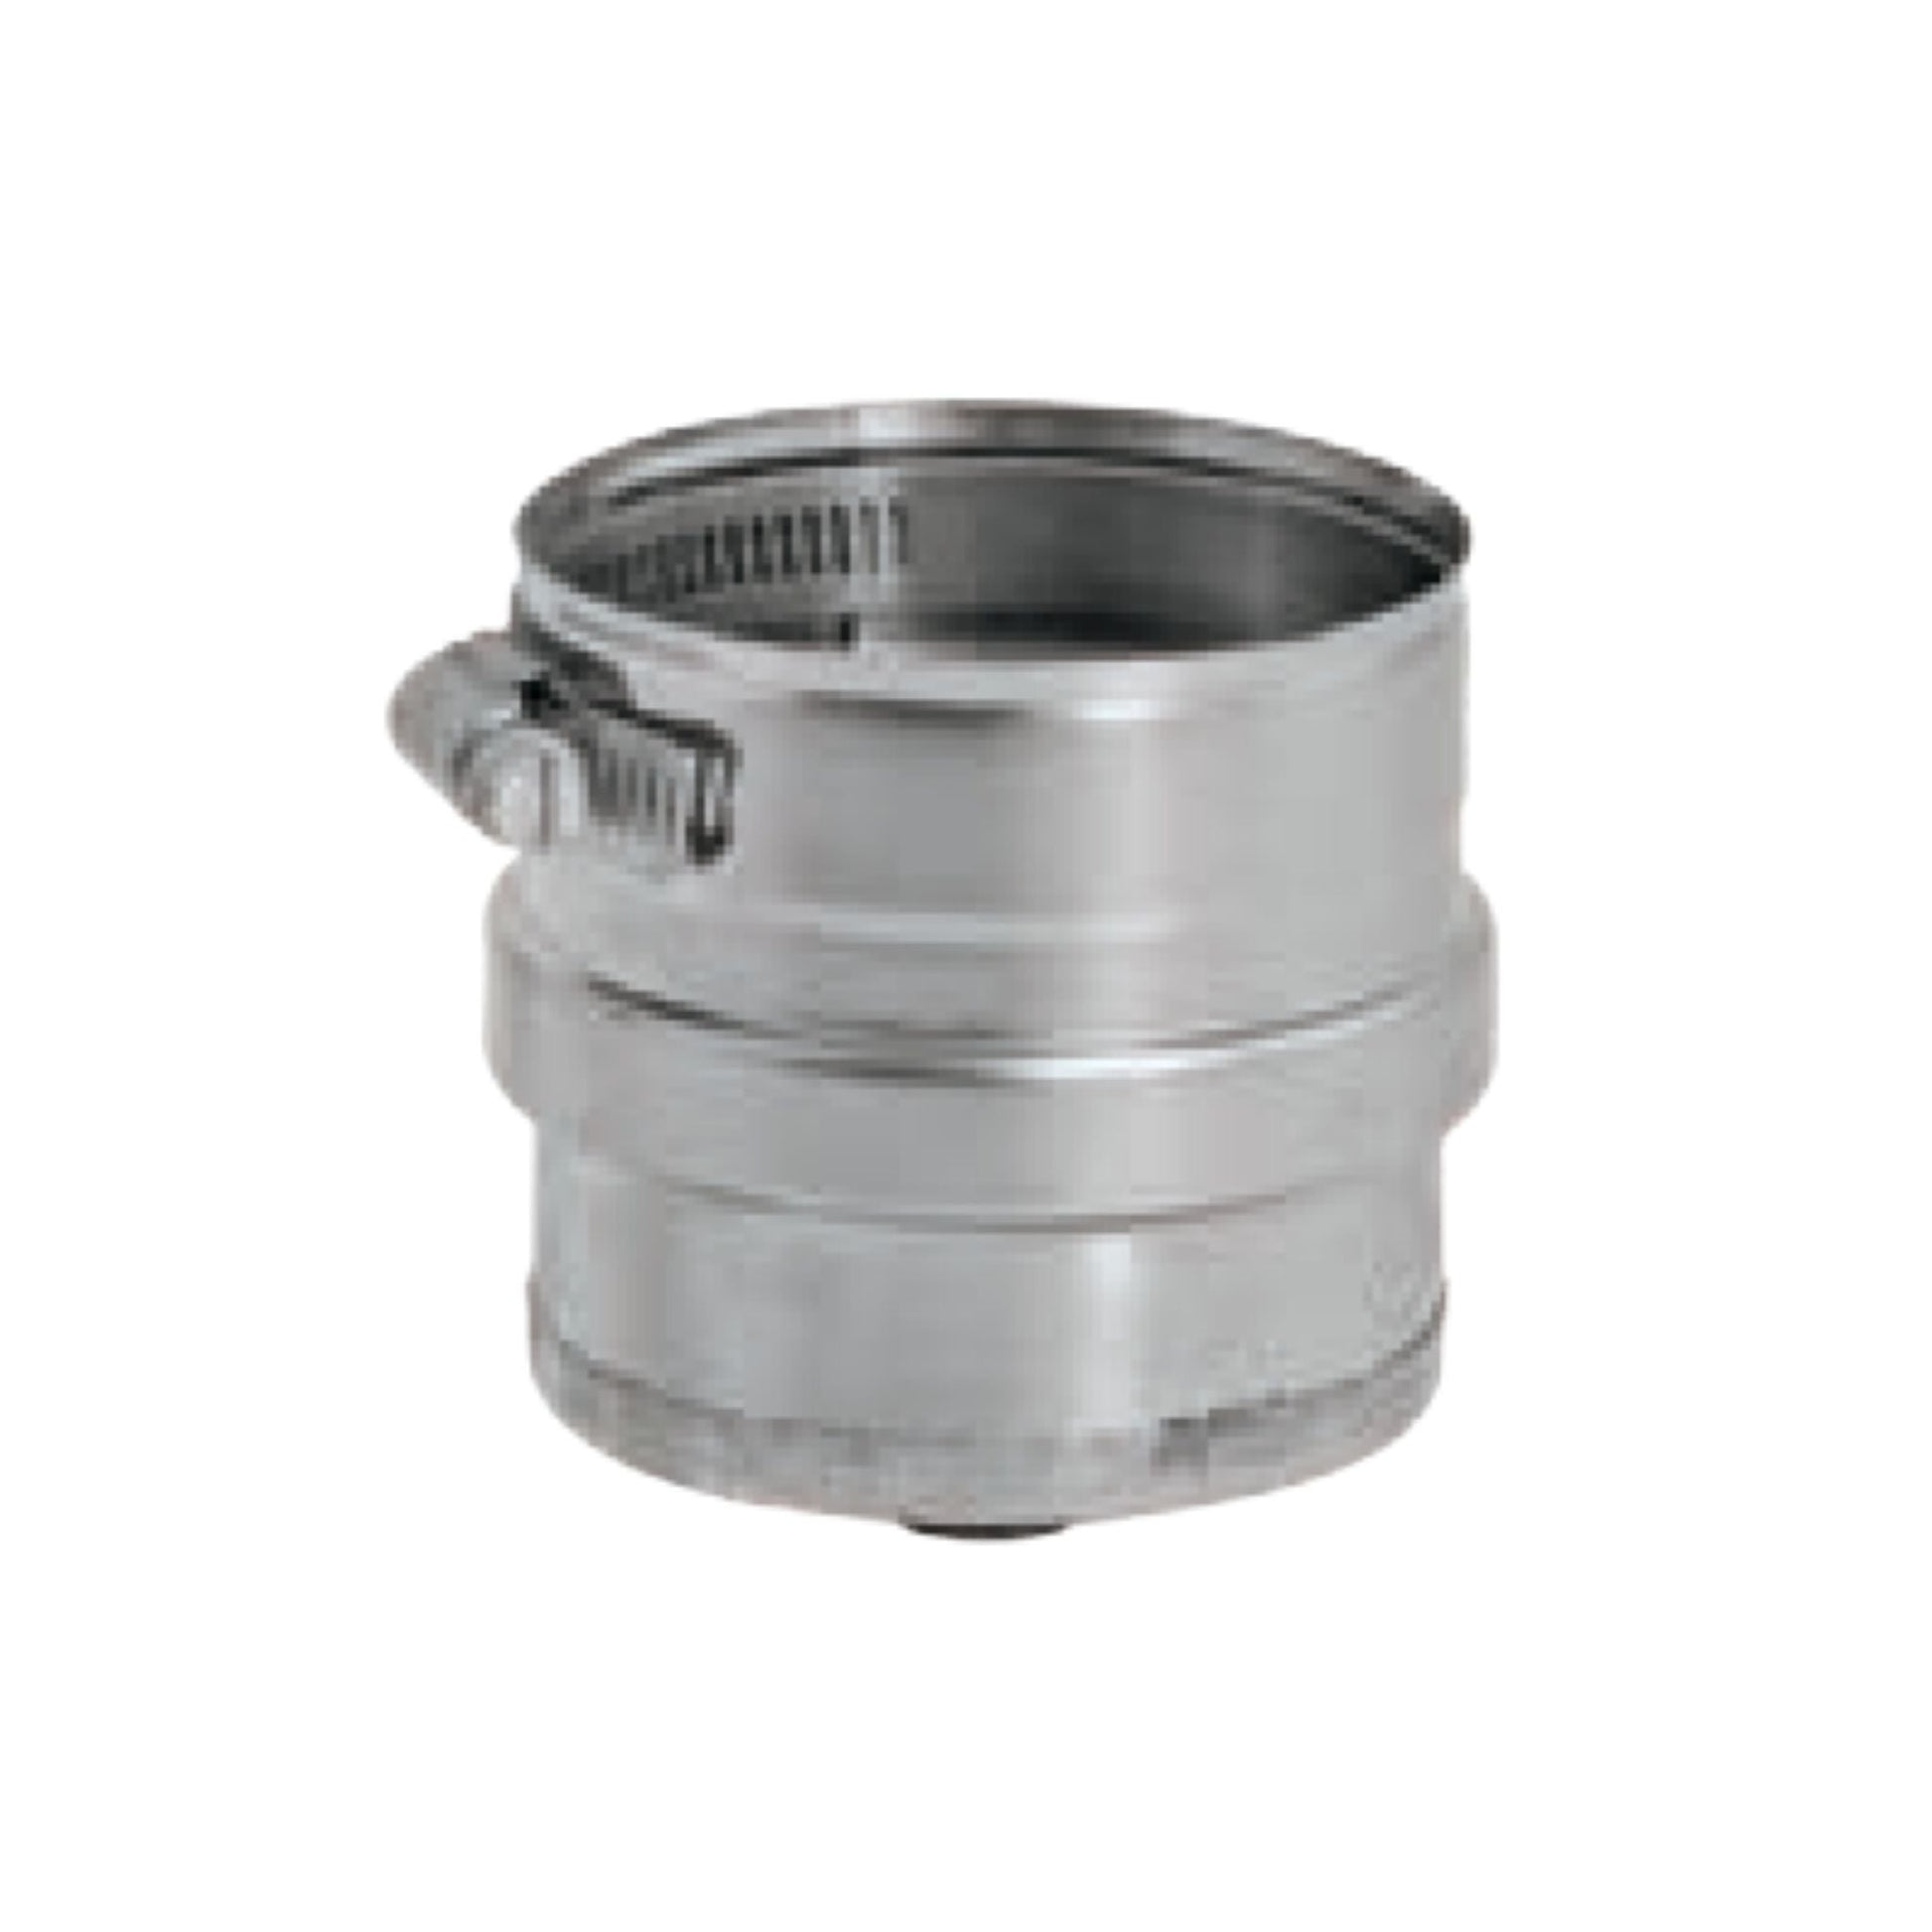 DuraVent FasNSeal 3" 29-4C Stainless Steel Drain Fitting